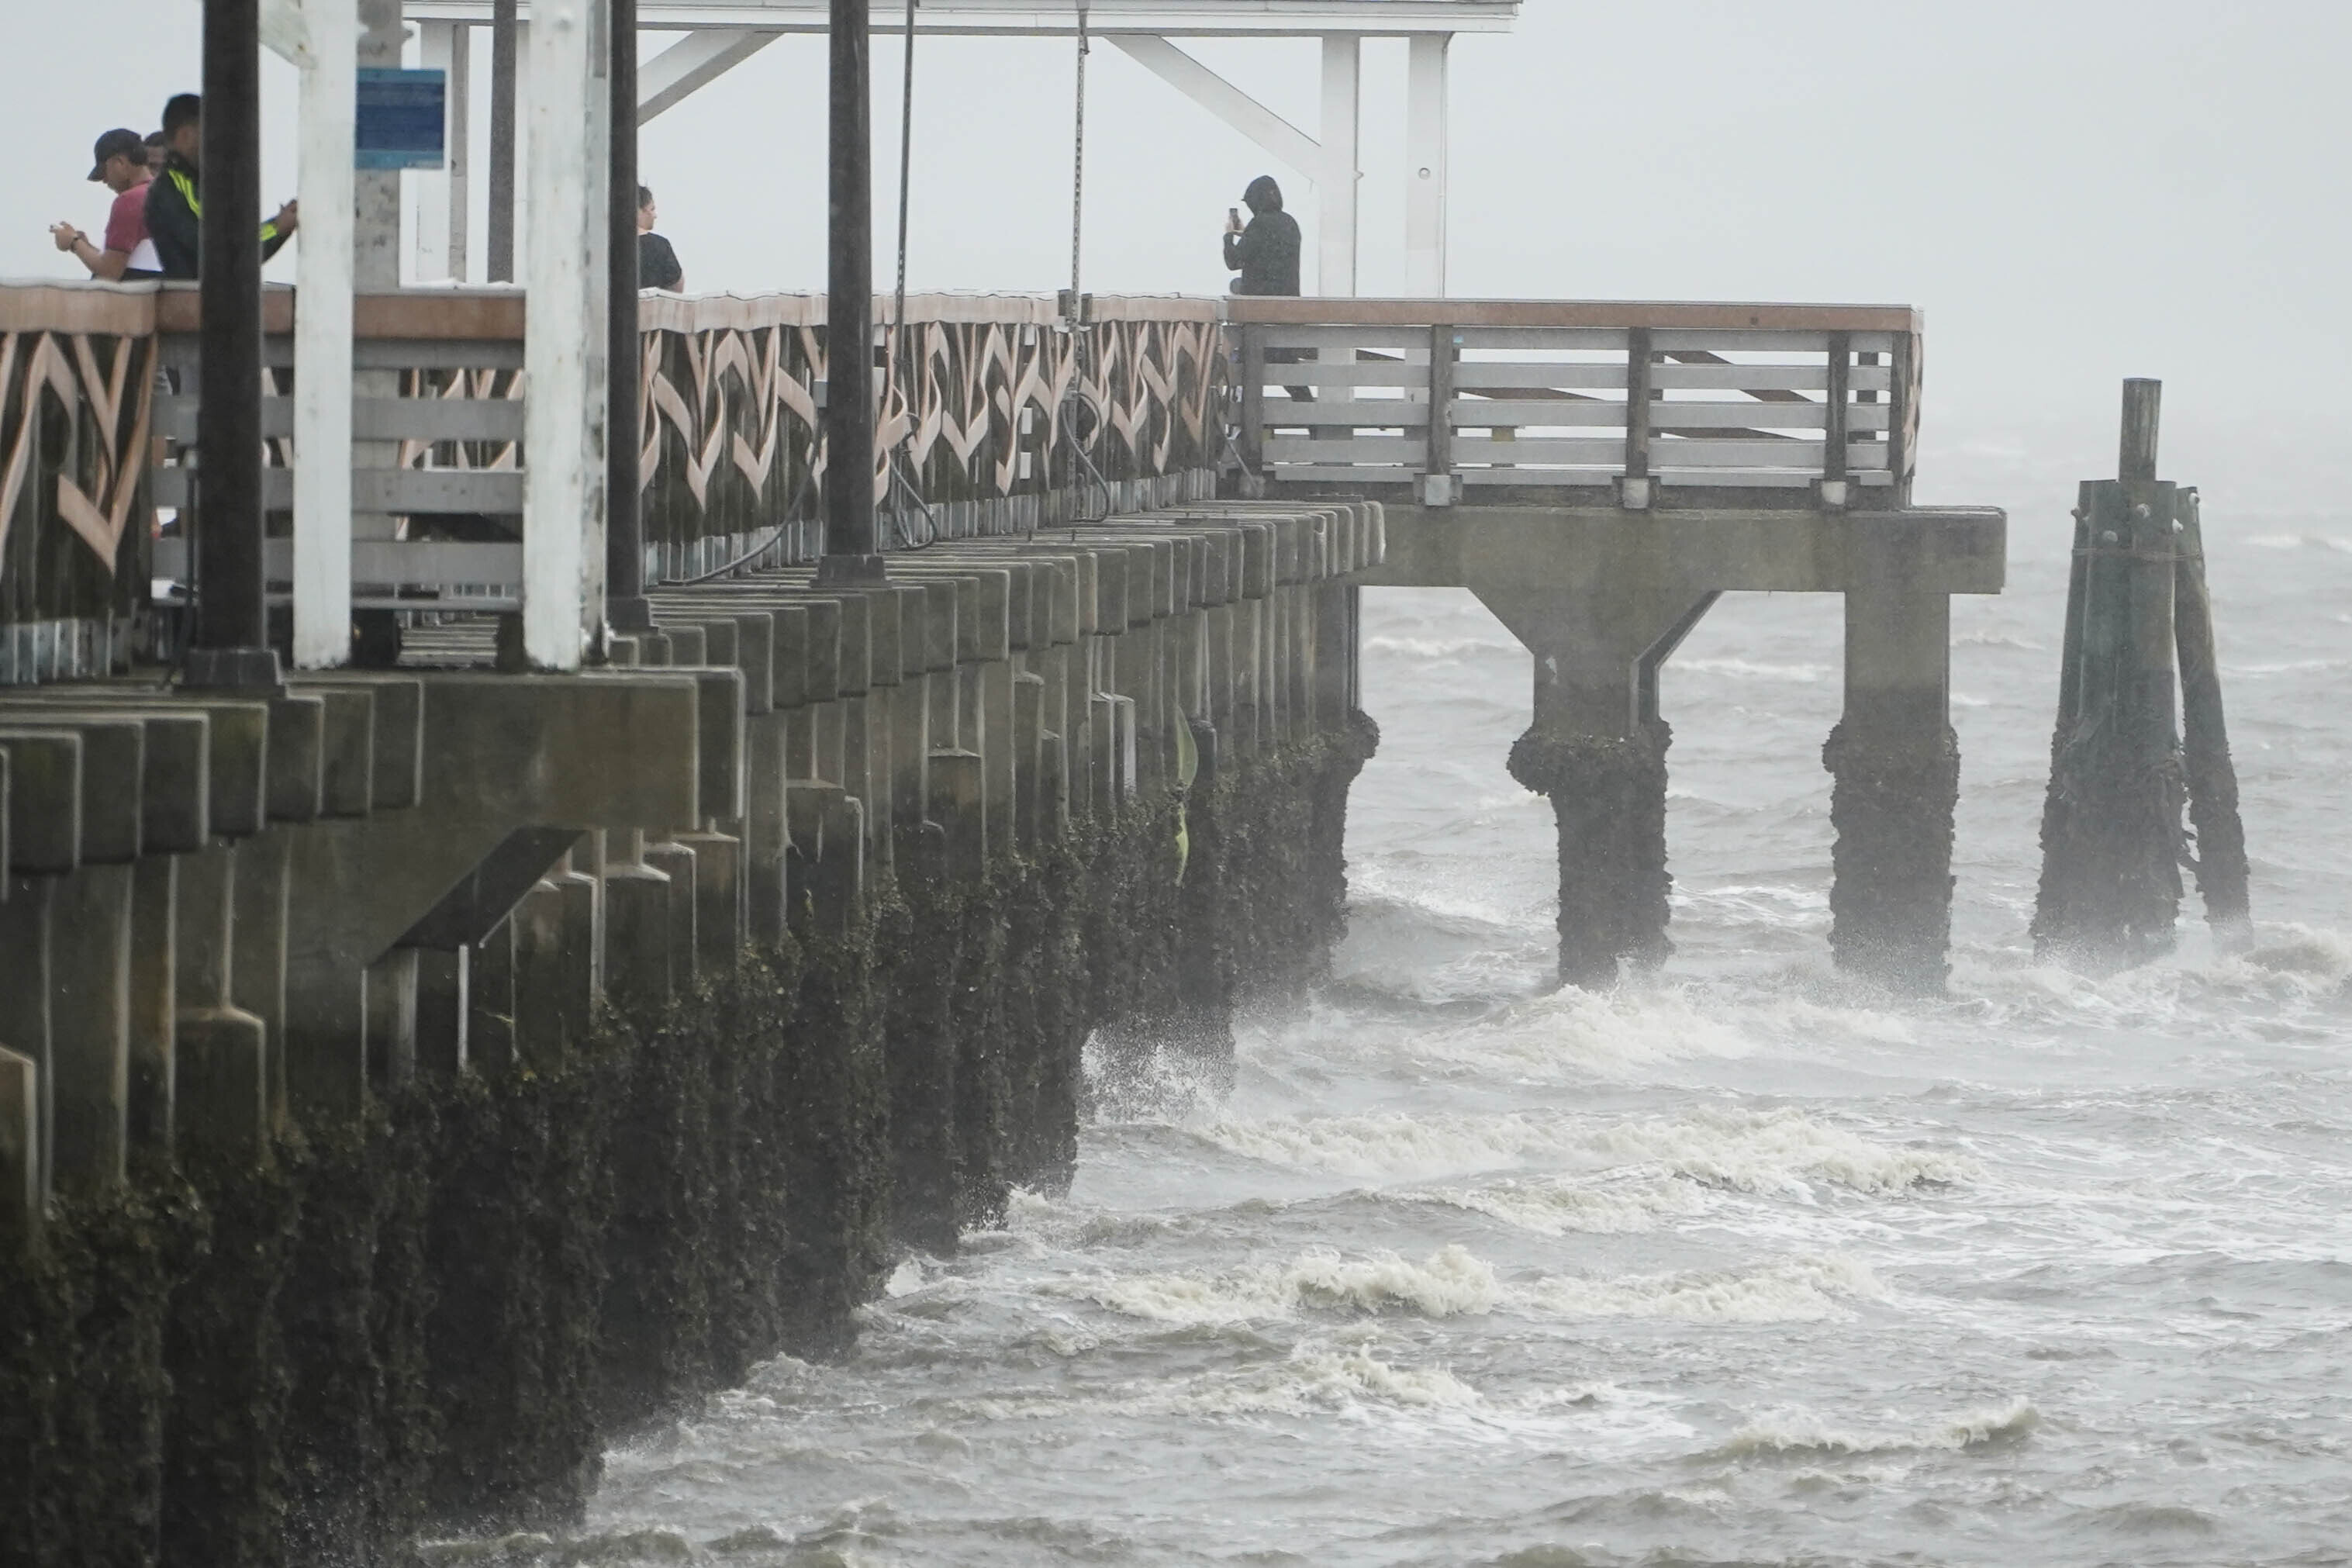 Waves crash along the Ballast Point Pier ahead of Hurricane Ian in Tampa, Florida